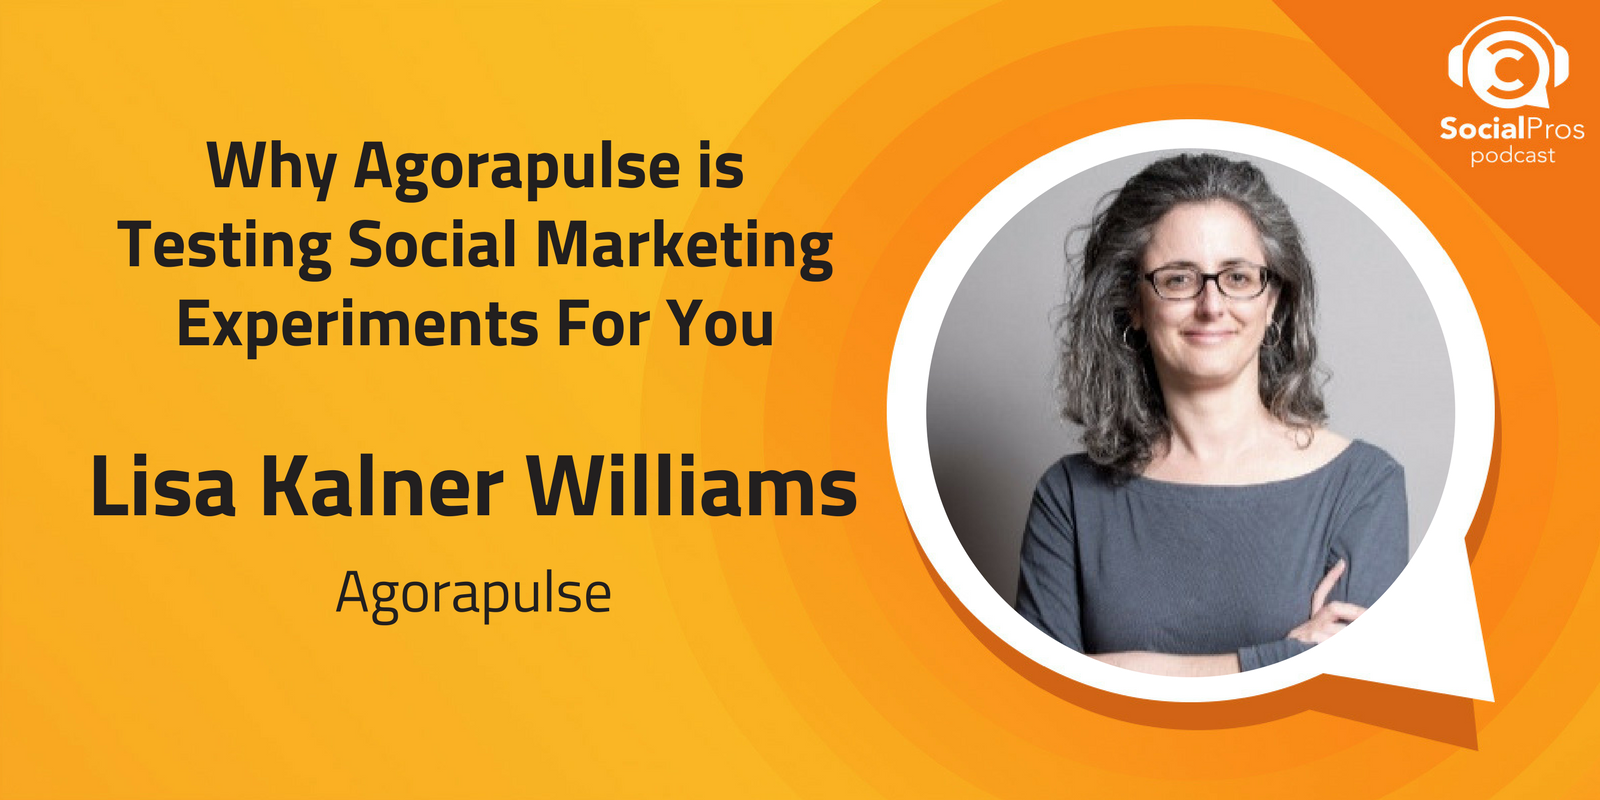 Why Agorapulse is testing social marketing experiments for you